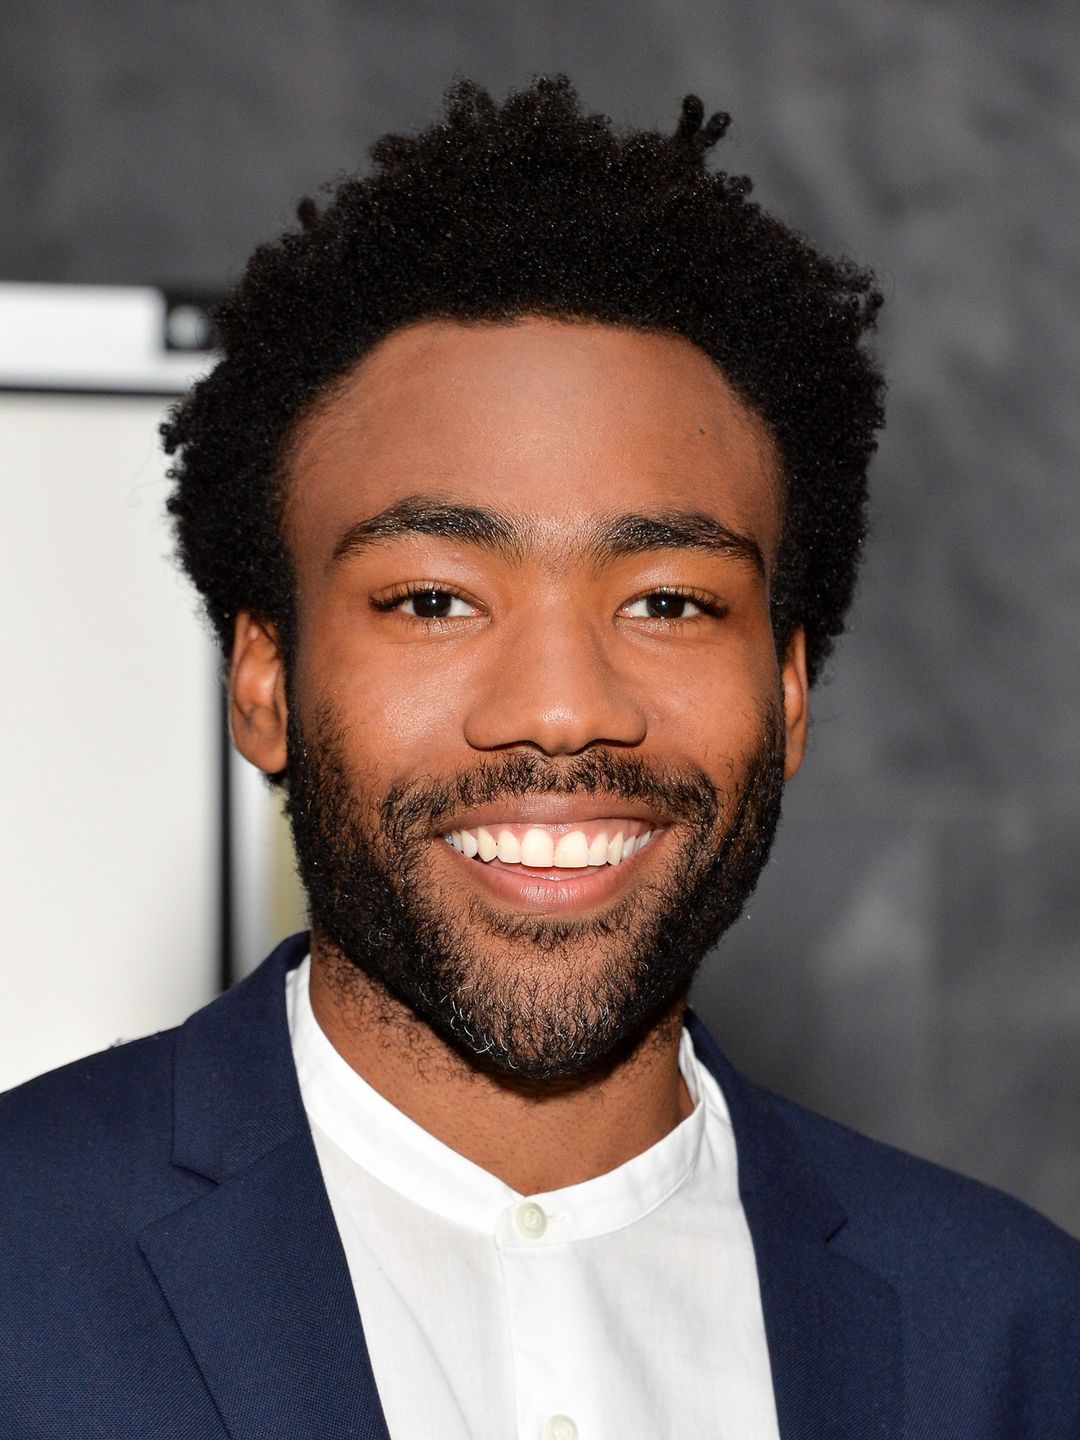 Donald Glover who is his father